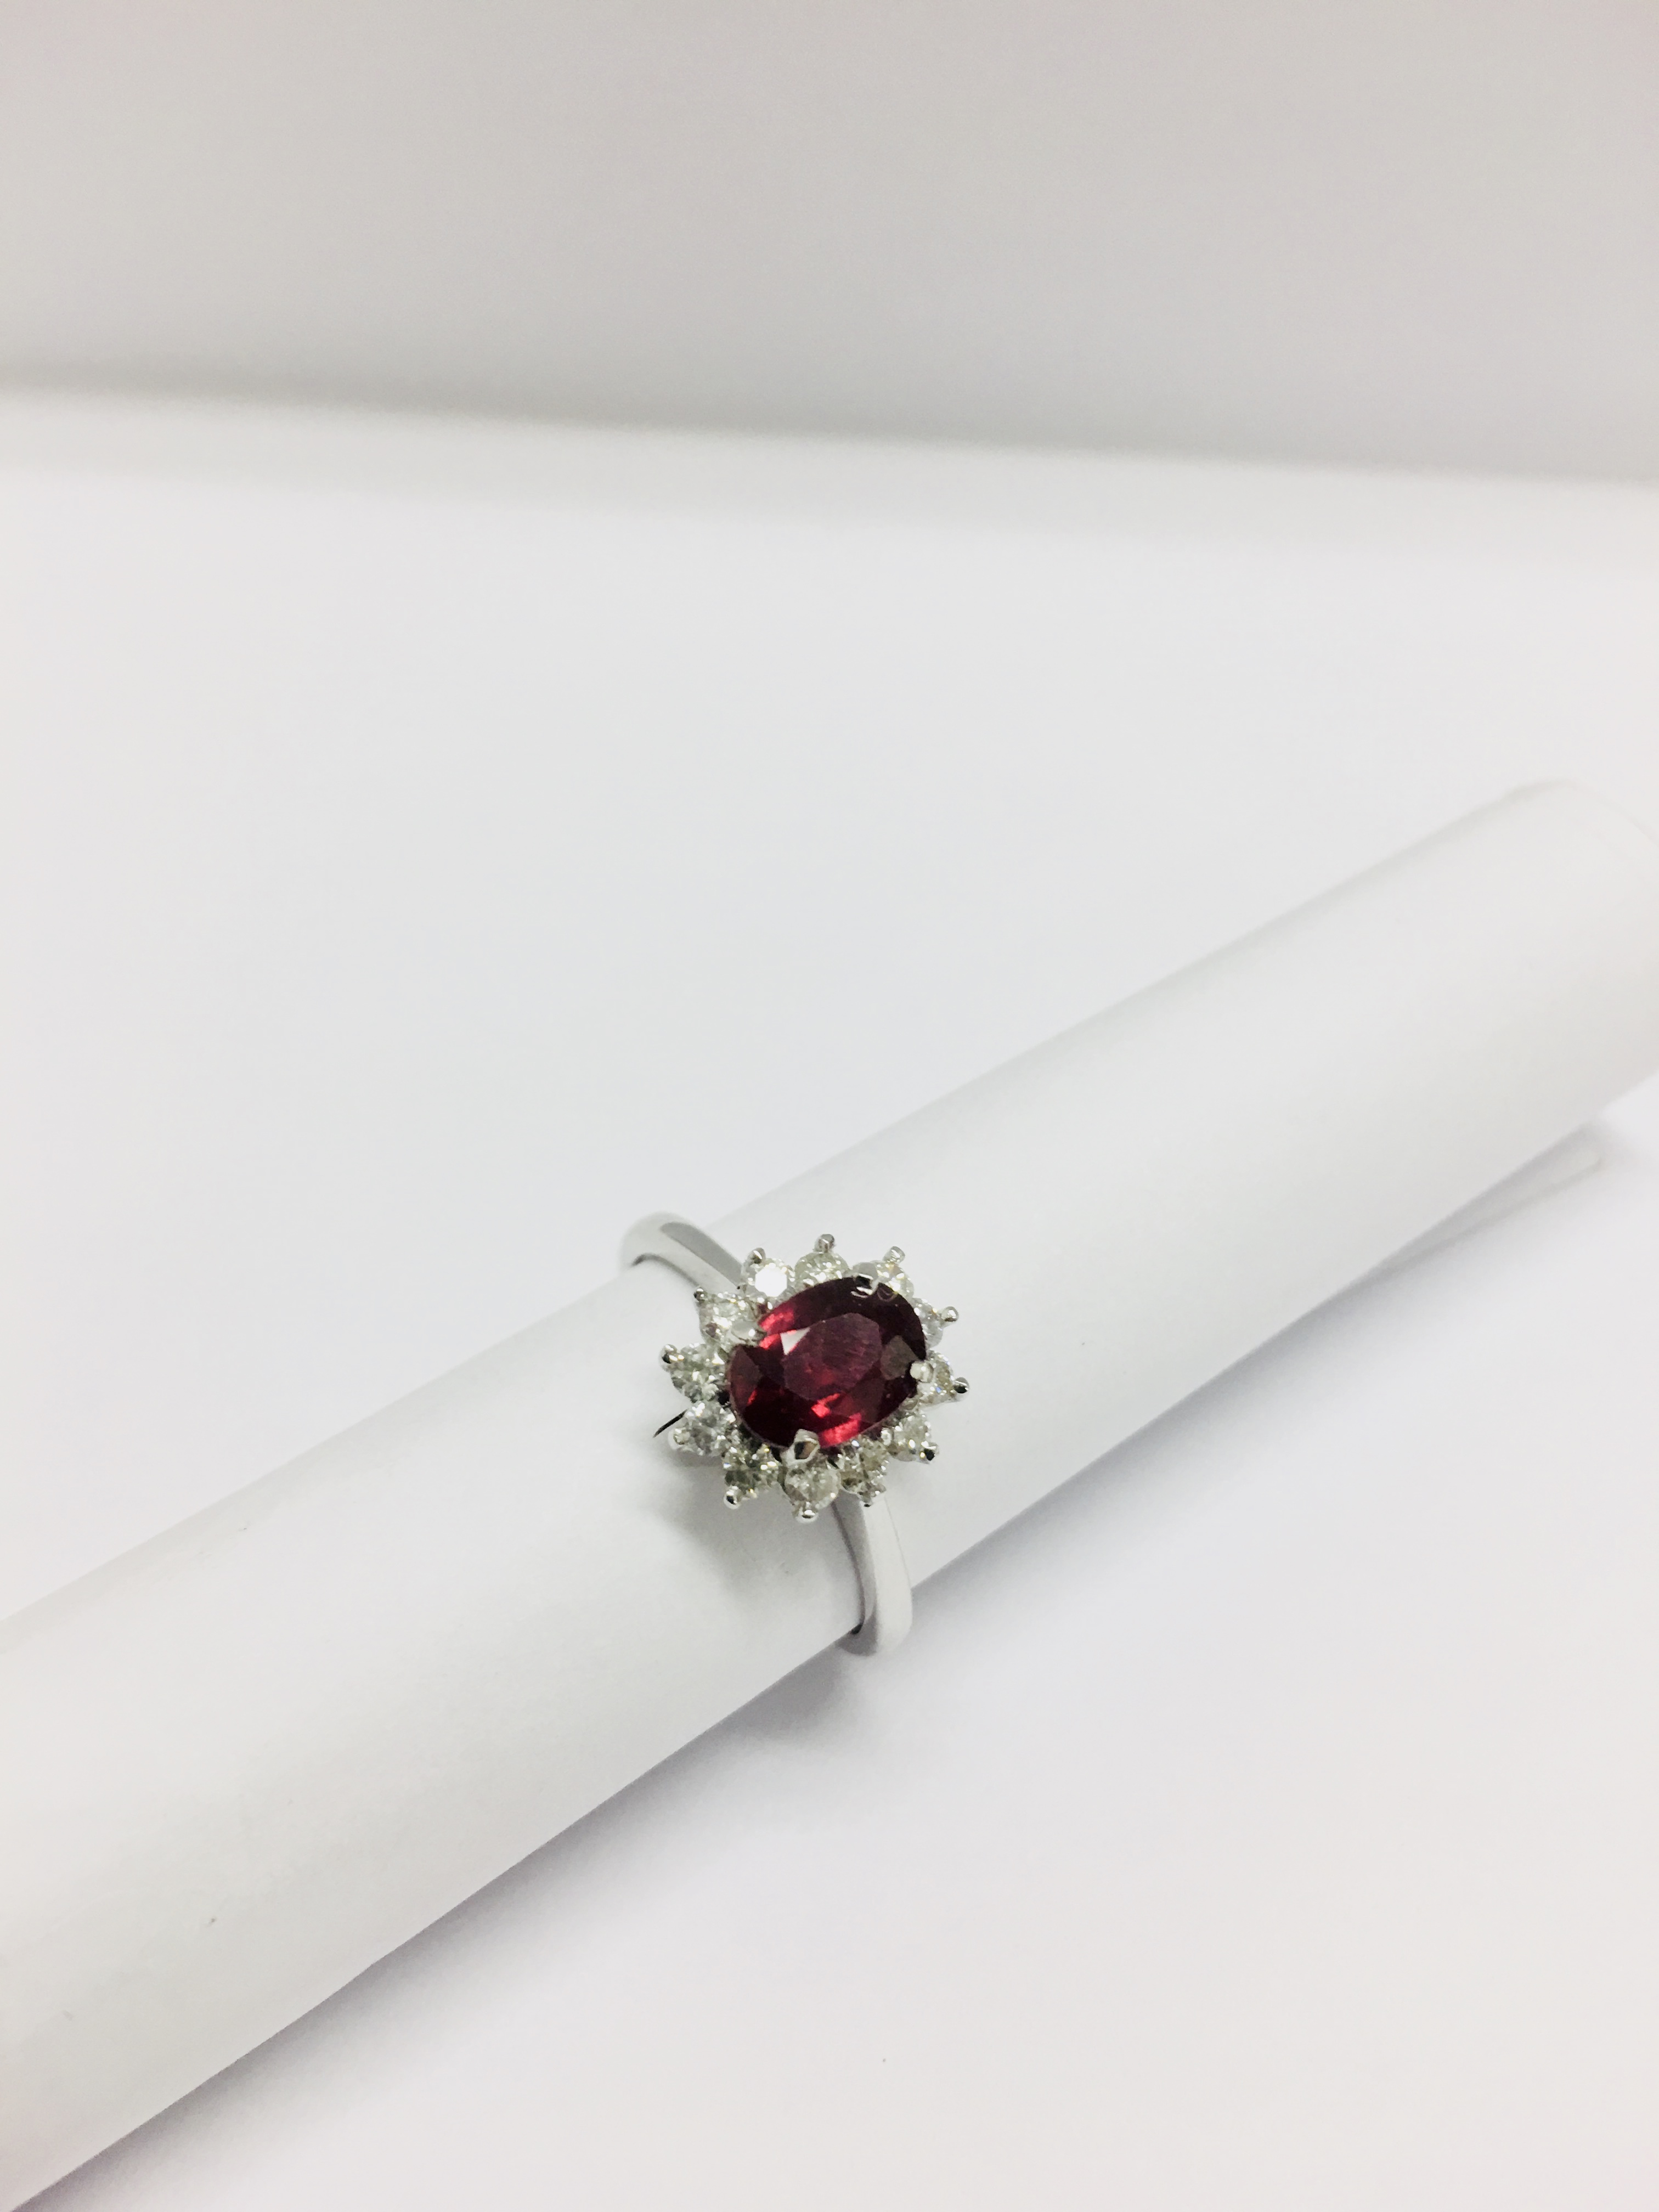 0.80Ct Ruby And Diamond Cluster Ring Set With A Oval Cut(Glass Filled) Ruby - Image 5 of 9